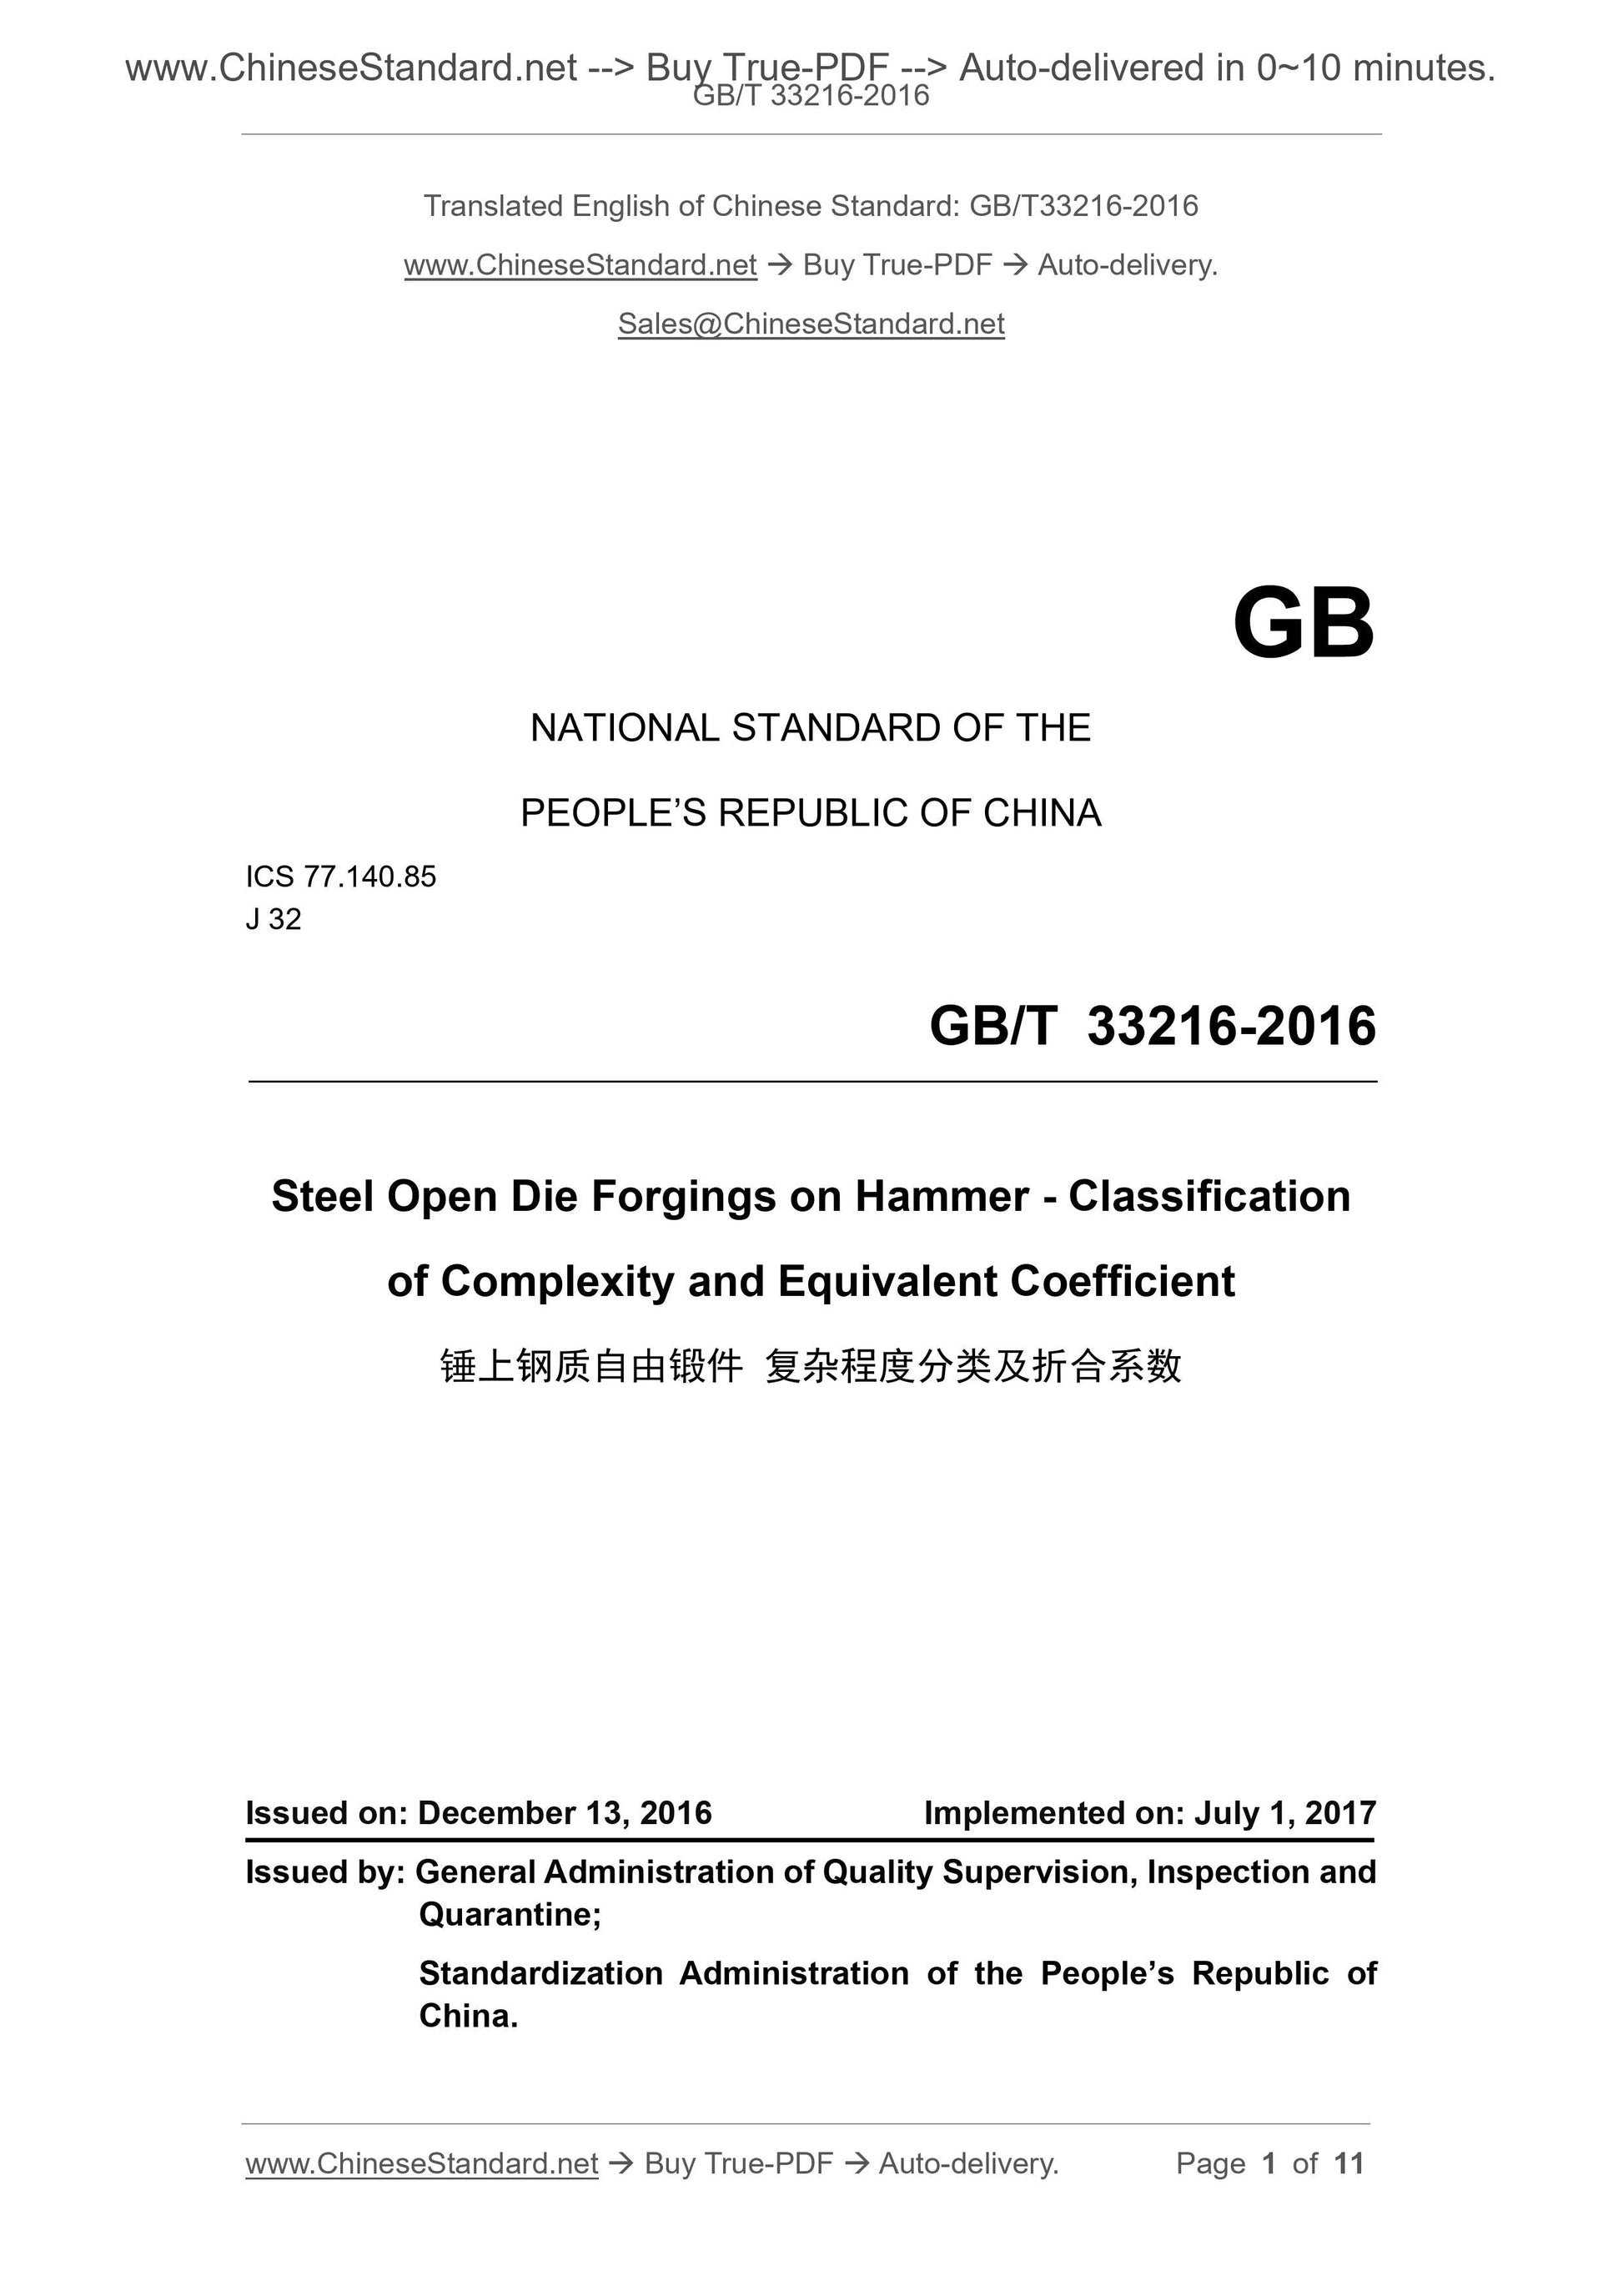 GB/T 33216-2016 Page 1